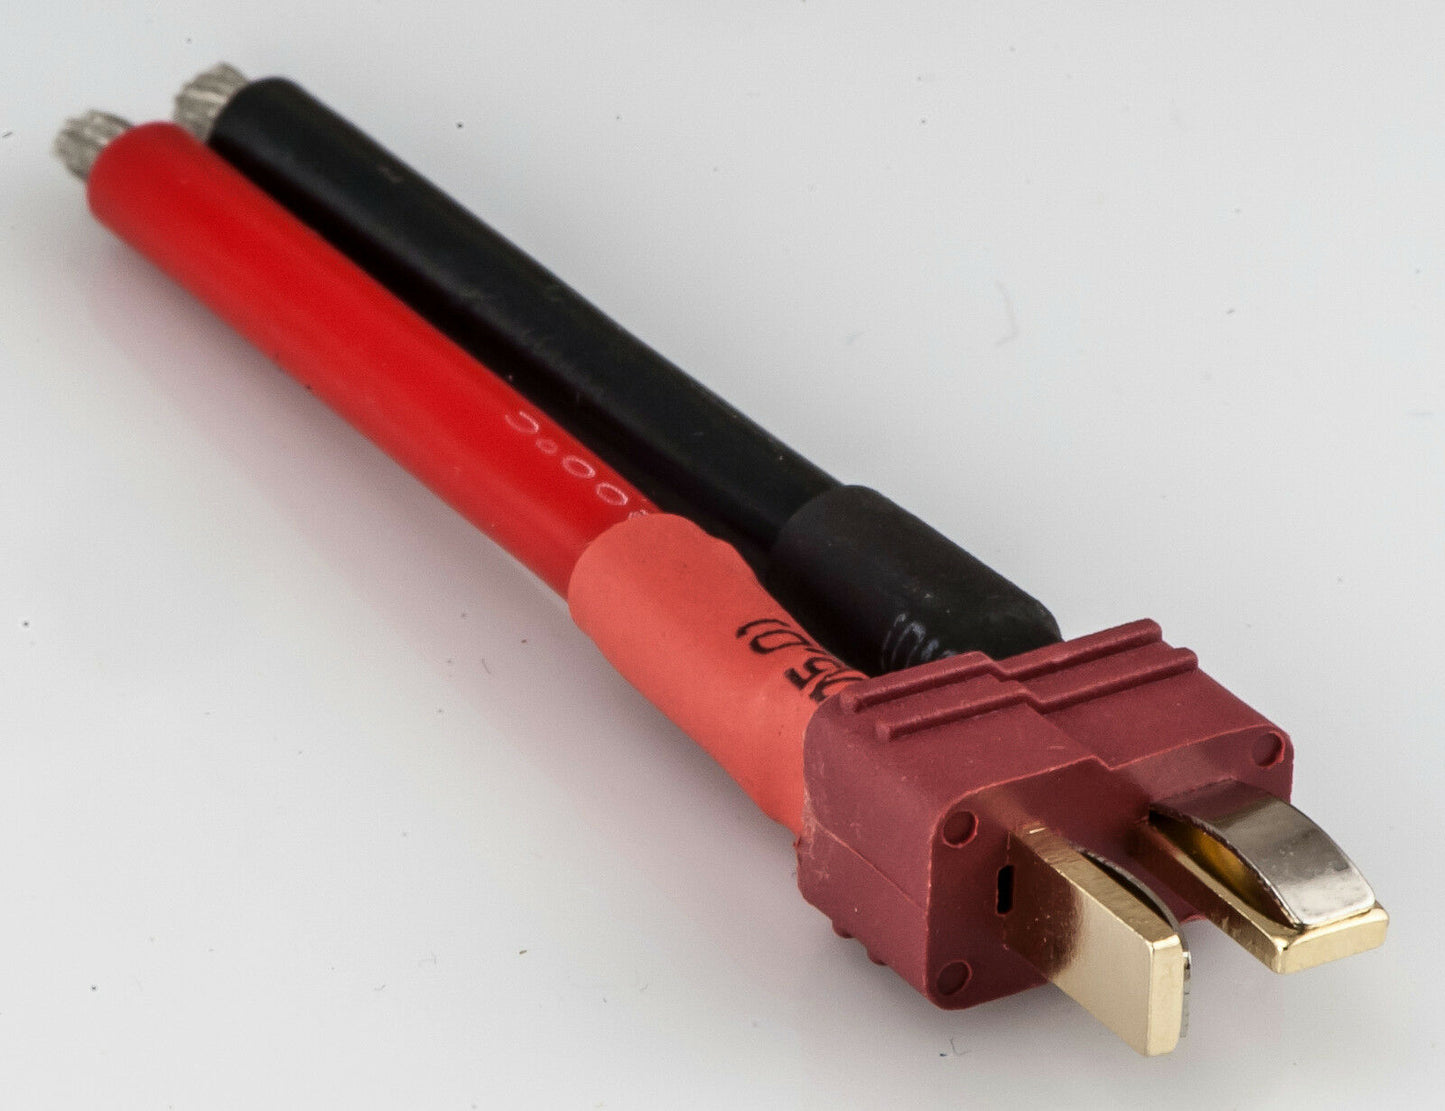 T-Plug Male Lipo Connector Adapter with 3CM or 10CM 12awg Silicon Wire